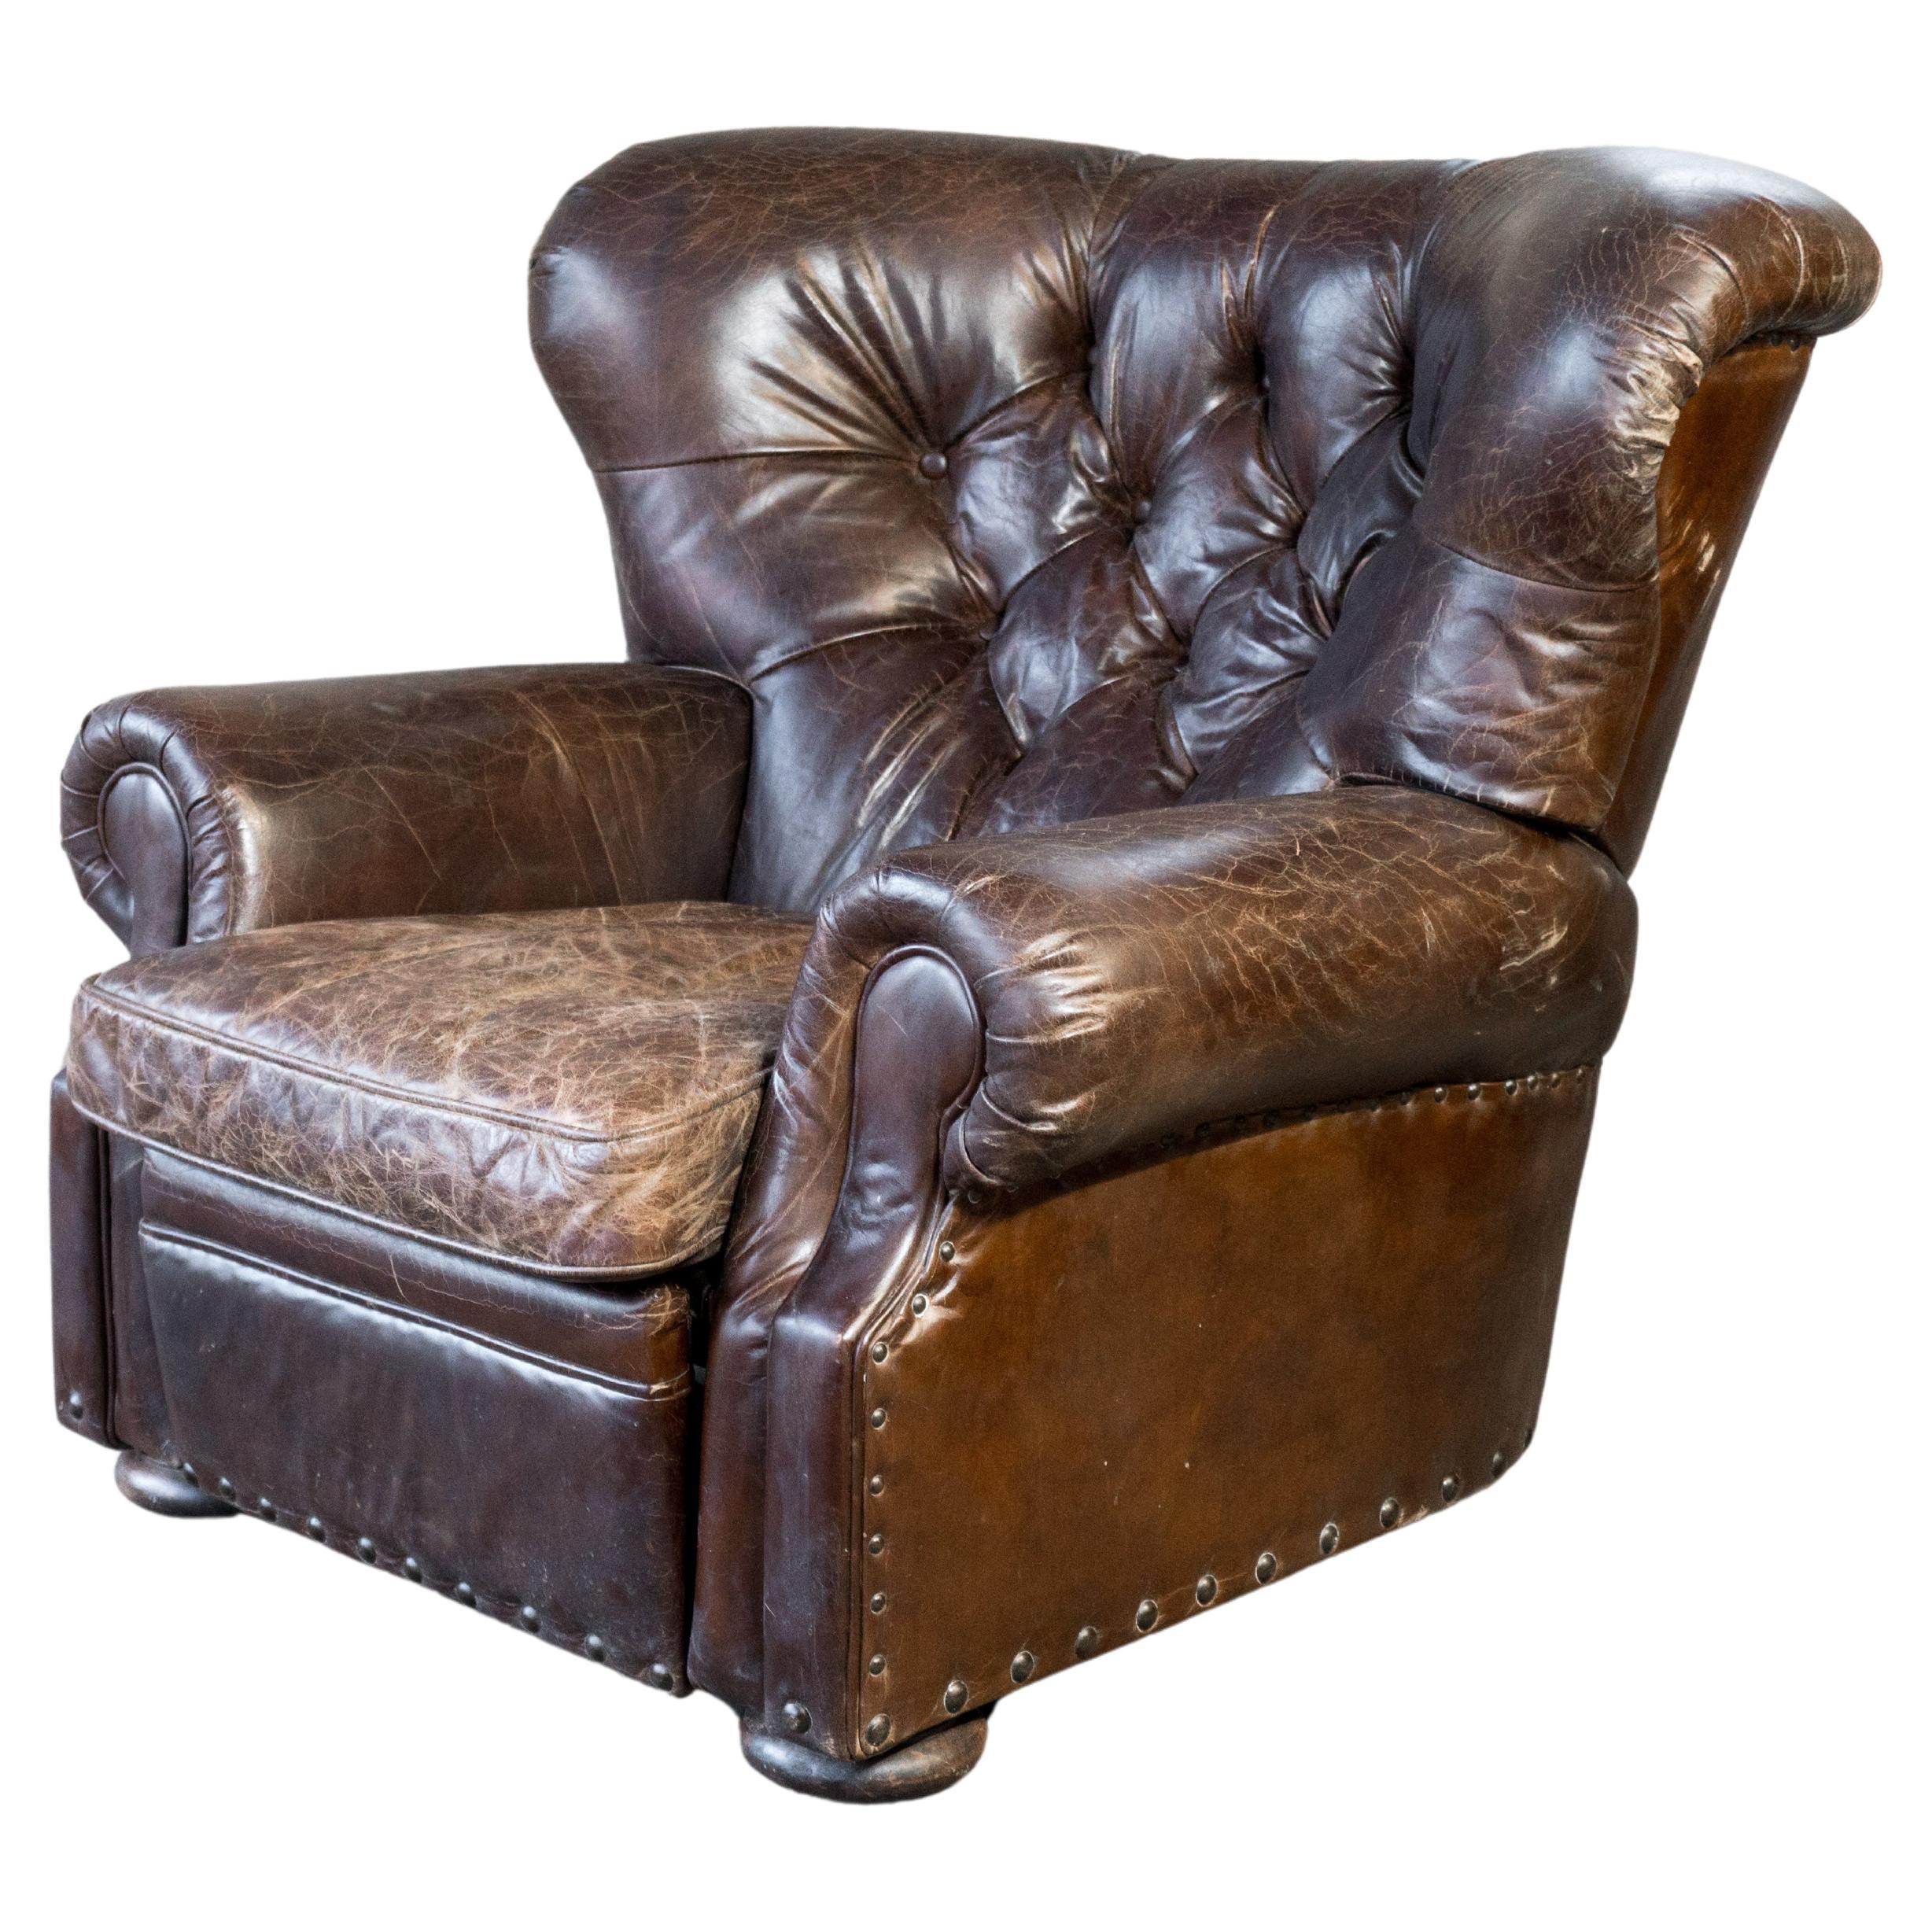 Restoration Hardware Churchill Brown Leather Recliner Chair With Nailheads Trim